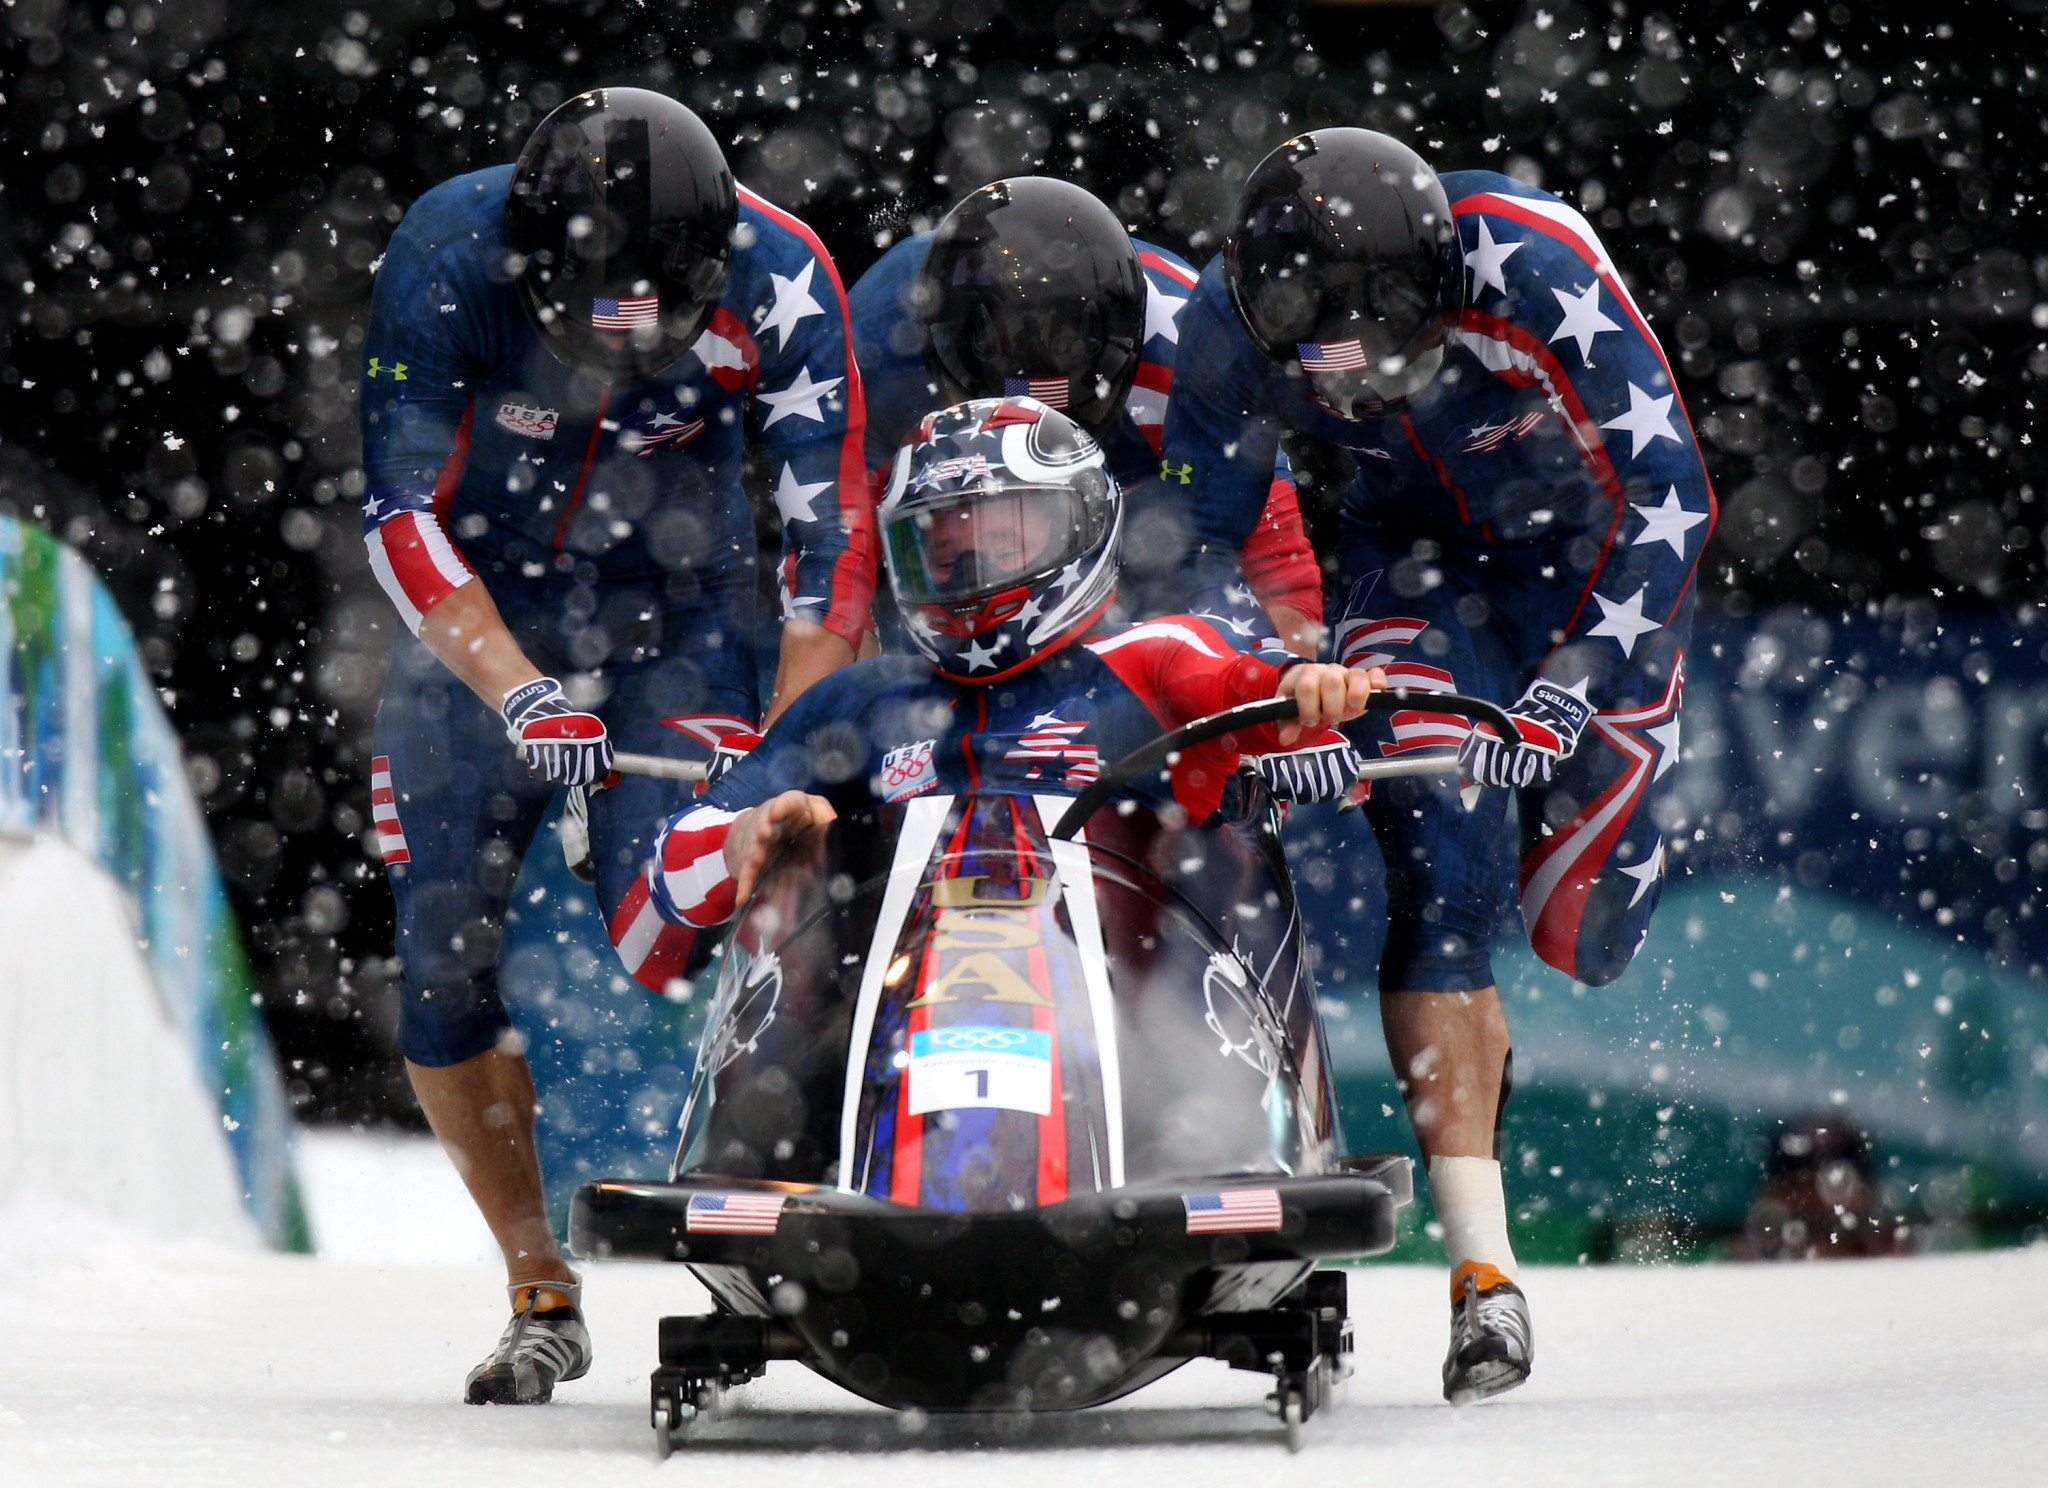 Curt Tomasevicz won Olympic gold at Vancouver 2010 in the four-man sled driven by the late Steven Holcomb ©Getty Images